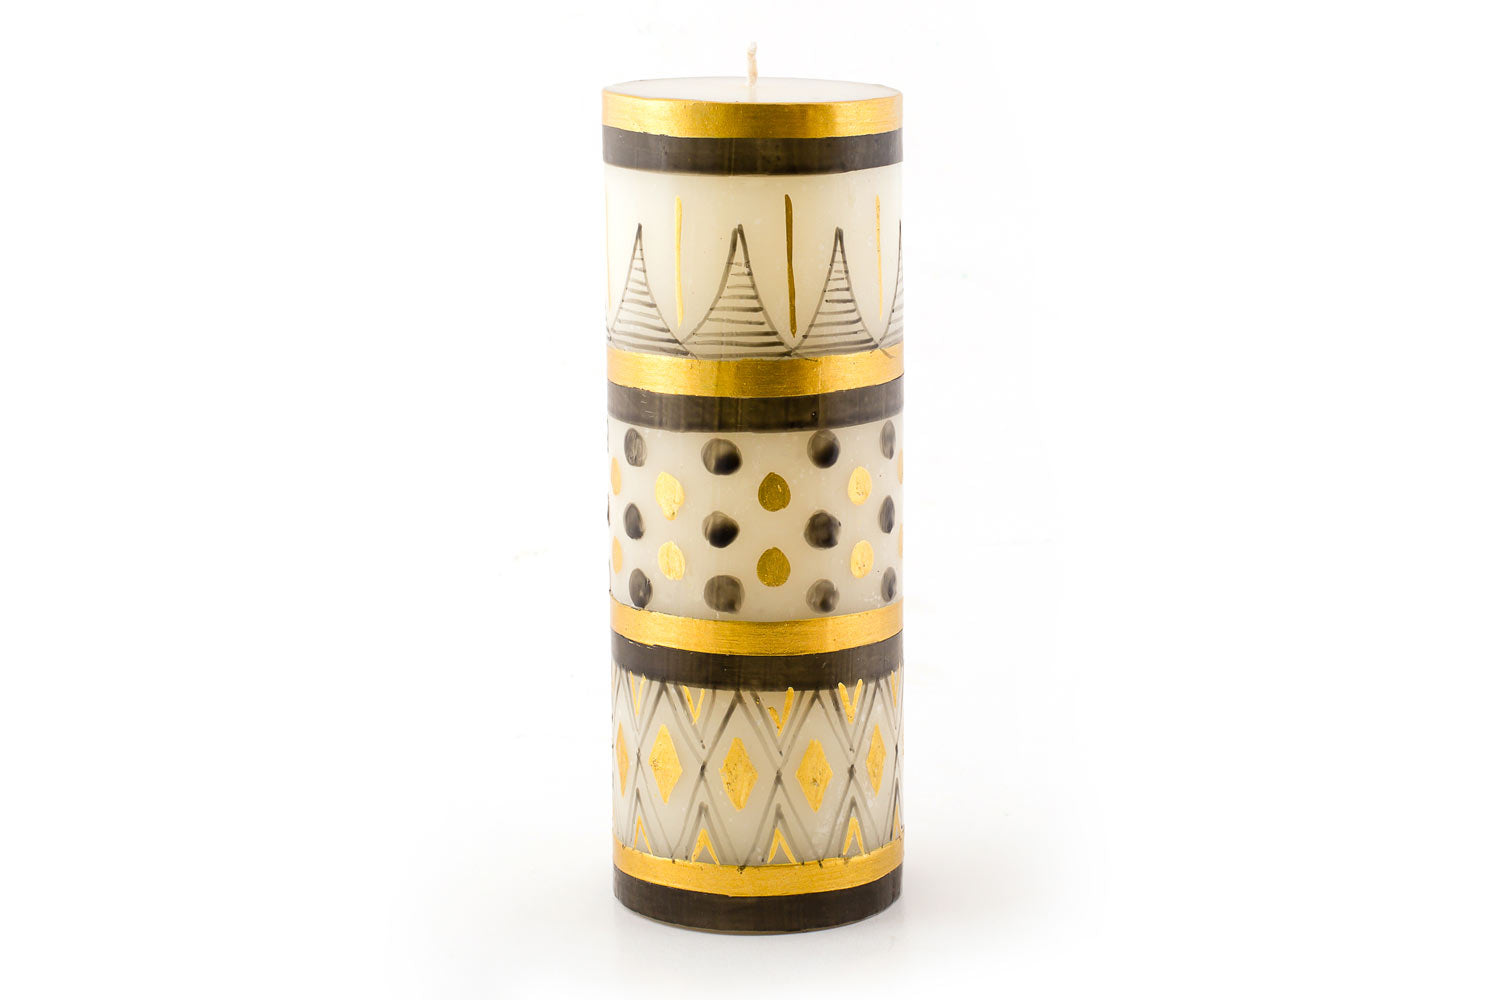 Celebration design 3" x 8" pillar candle. White background with grey/black and gold hand painting of dots, geometric and stripe designs. Fair Trade.